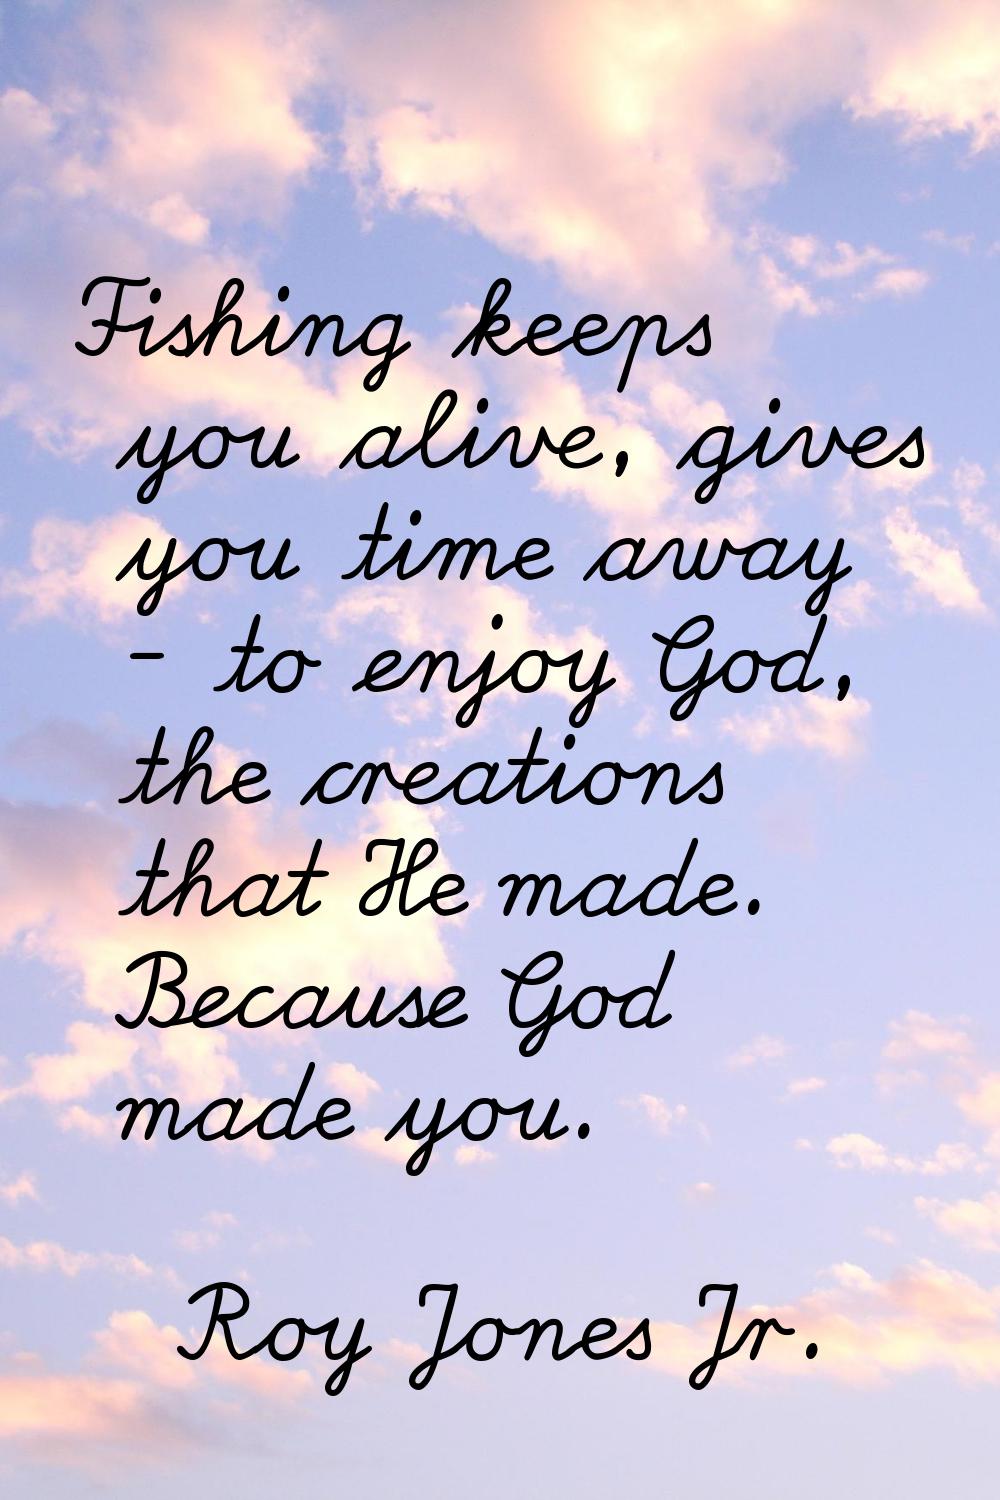 Fishing keeps you alive, gives you time away - to enjoy God, the creations that He made. Because Go